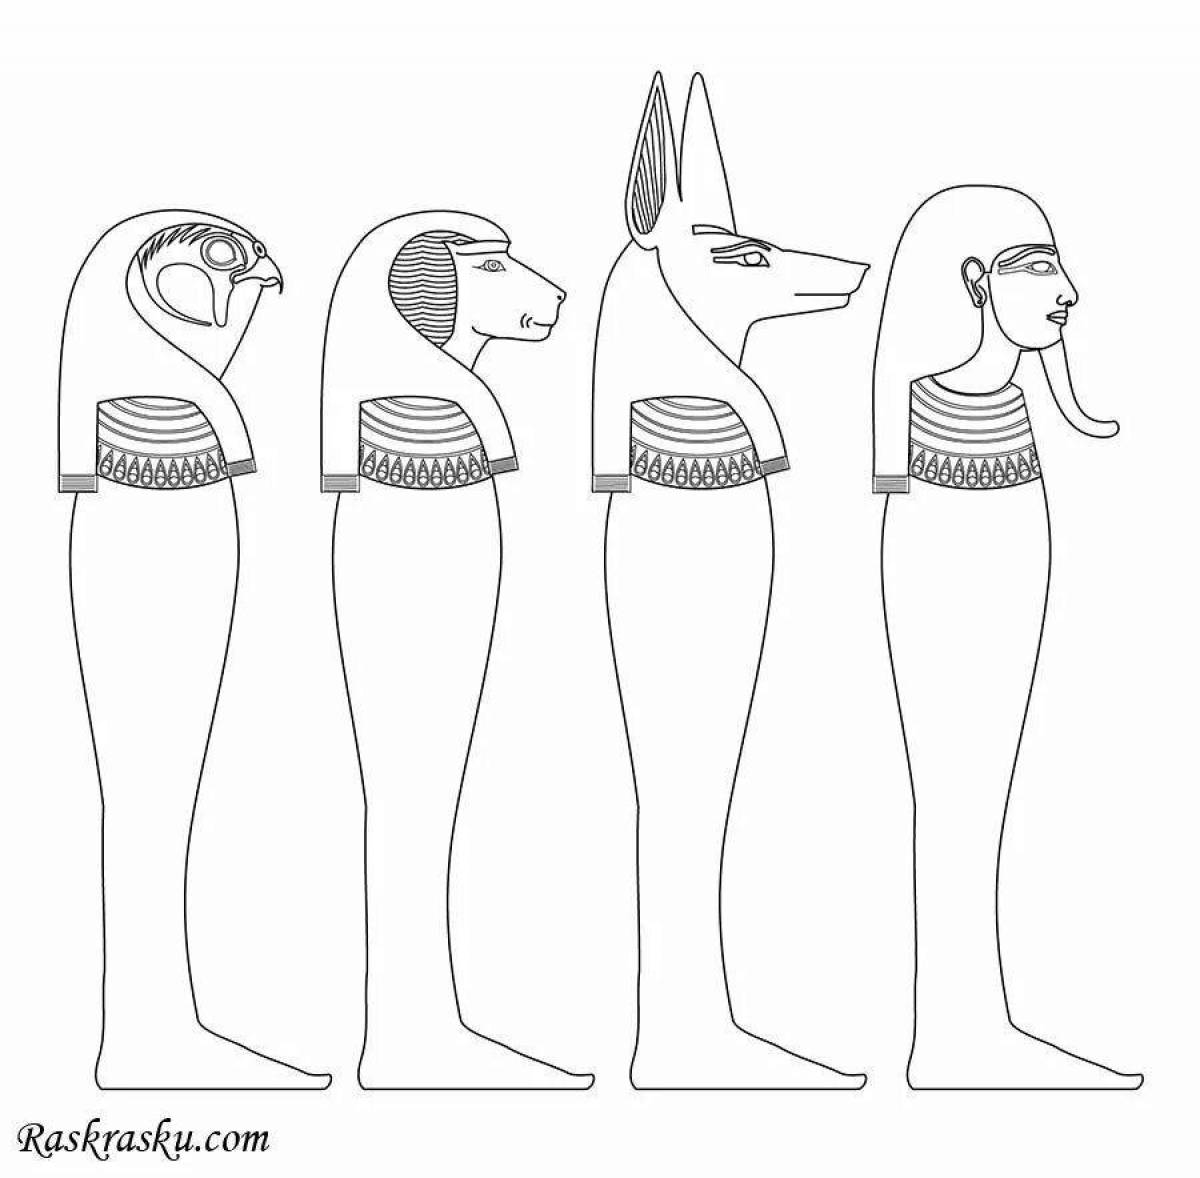 Ancient Egypt coloring book for kids